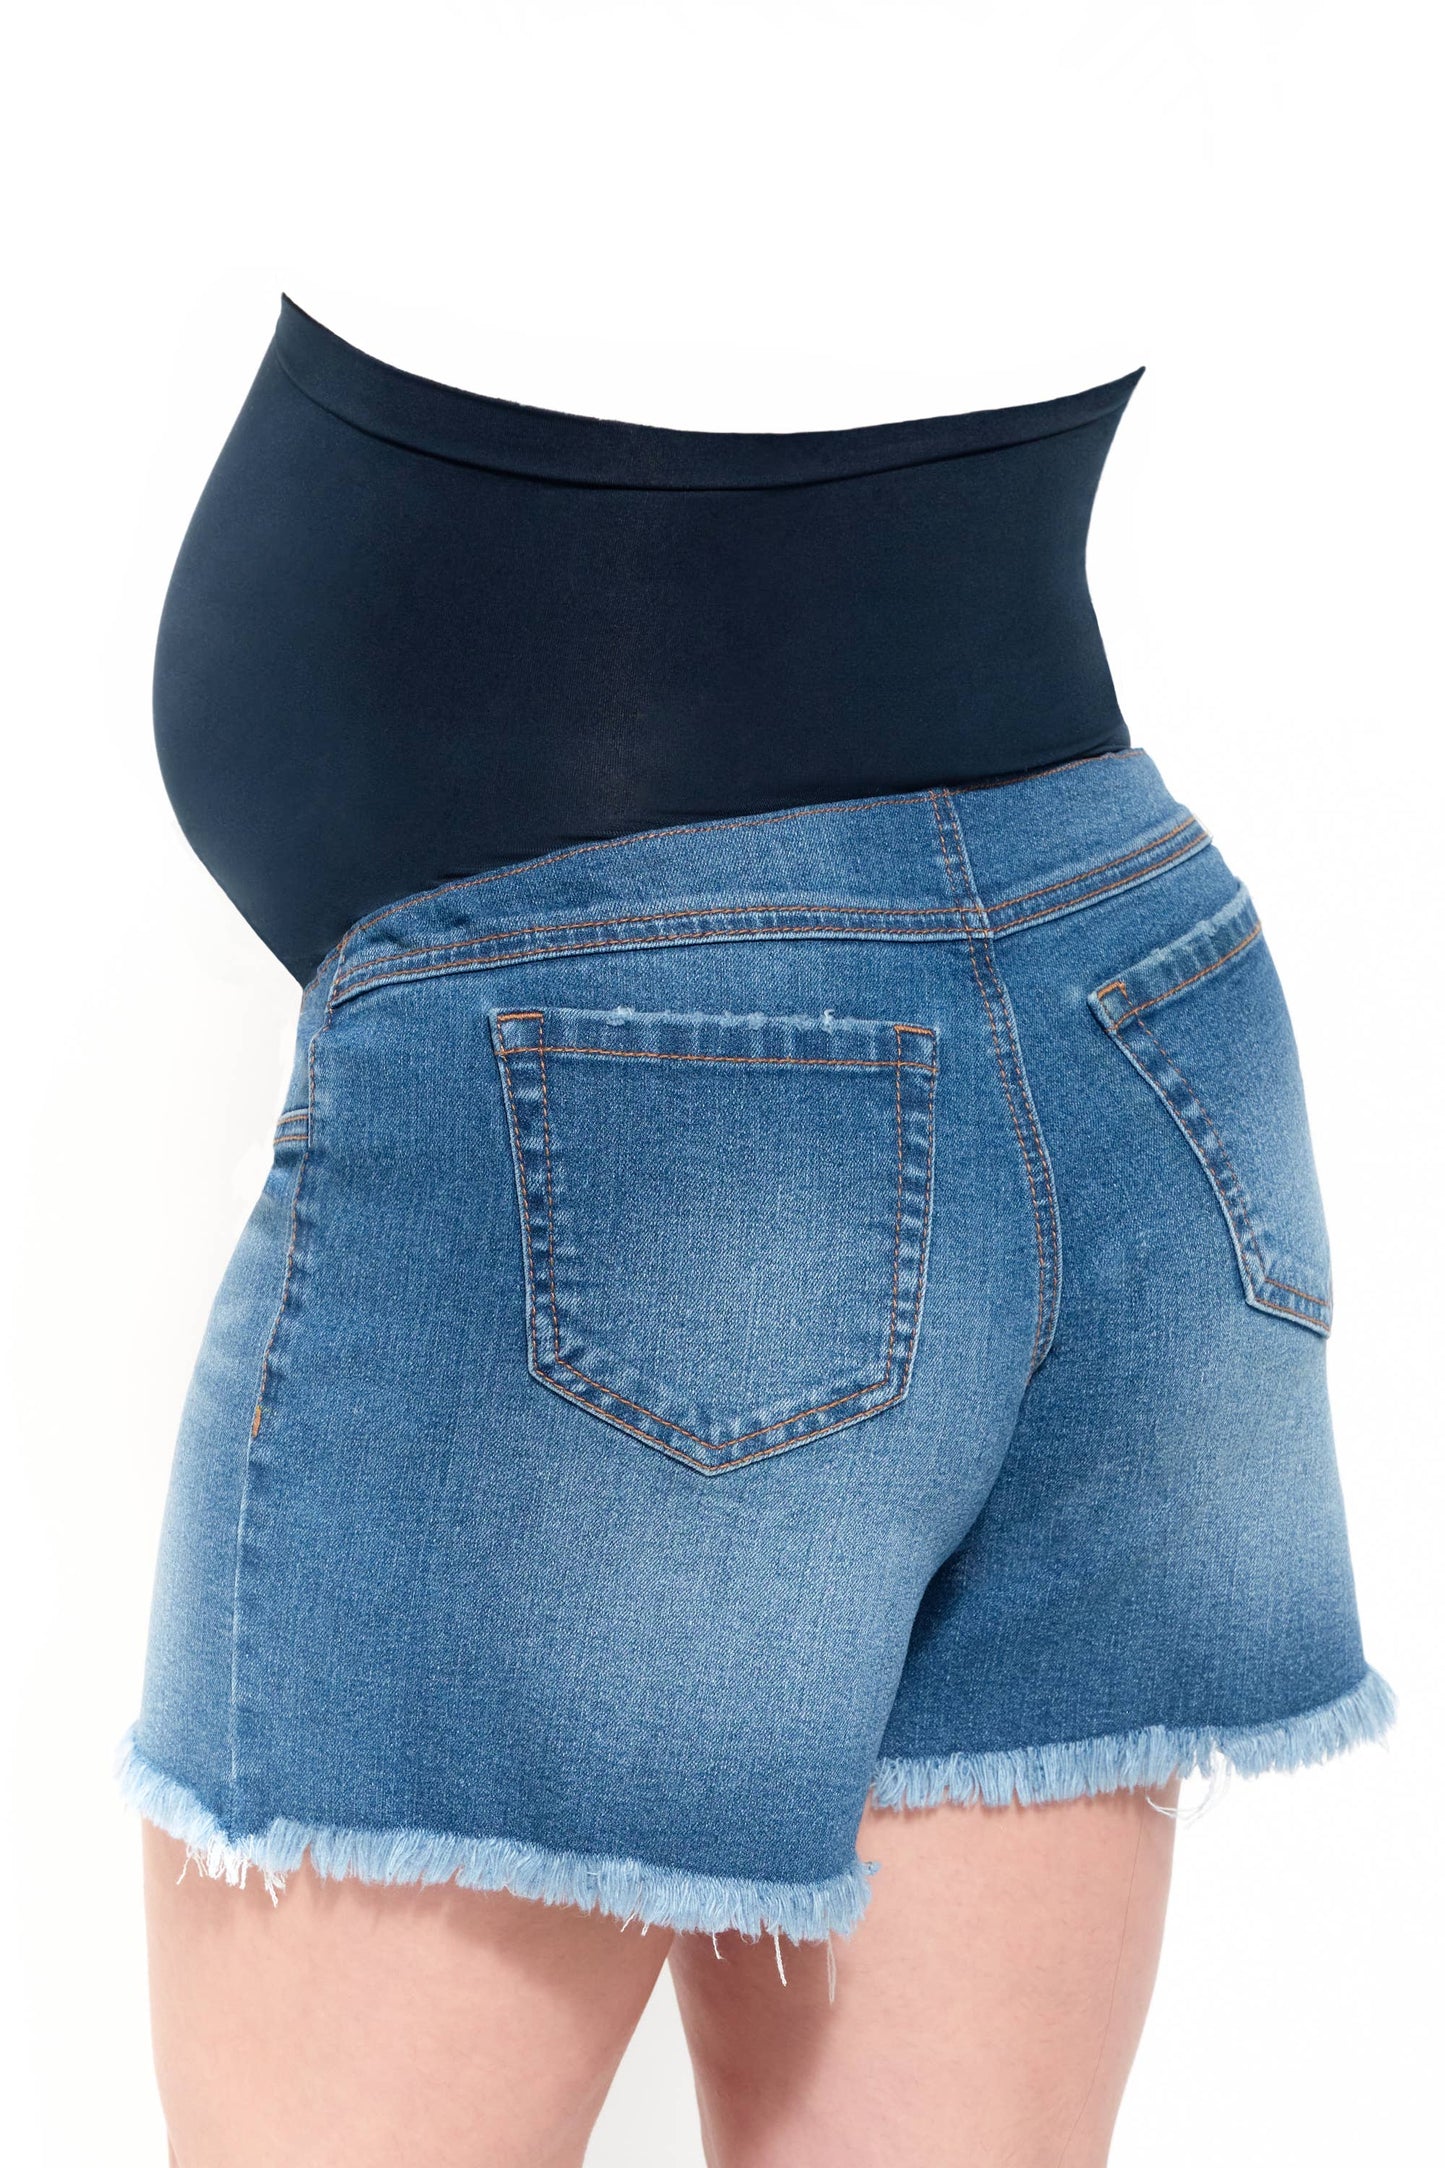 Maternity Sustainable 5" Loose Jean Shorts w/ Bellyband